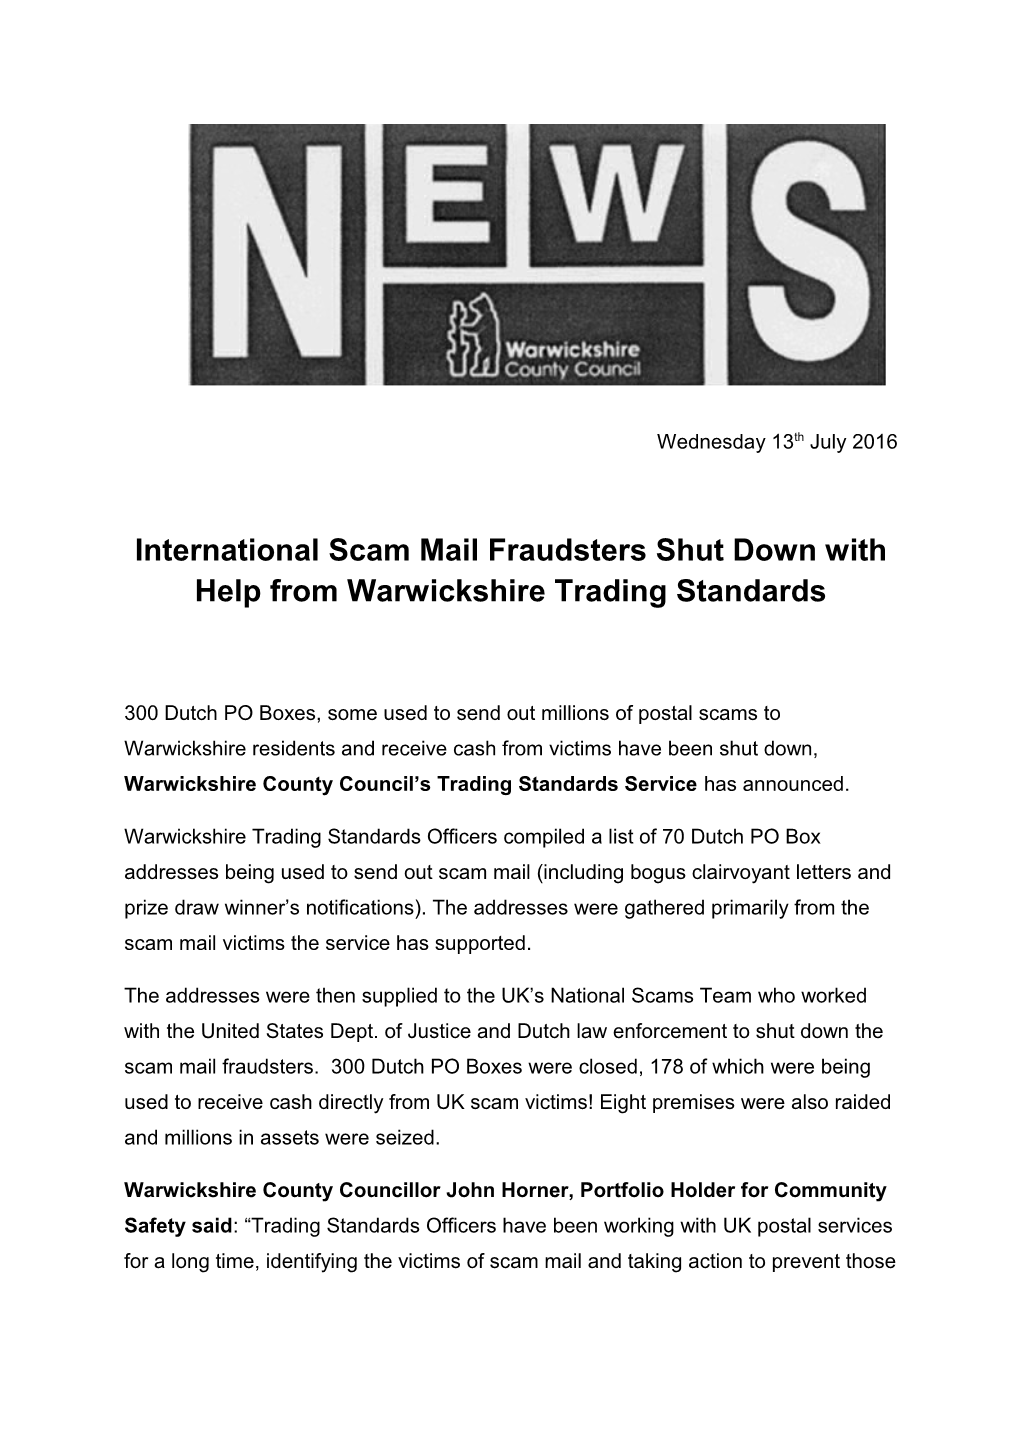 International Scam Mail Fraudsters Shut Down with Help from Warwickshire Trading Standards